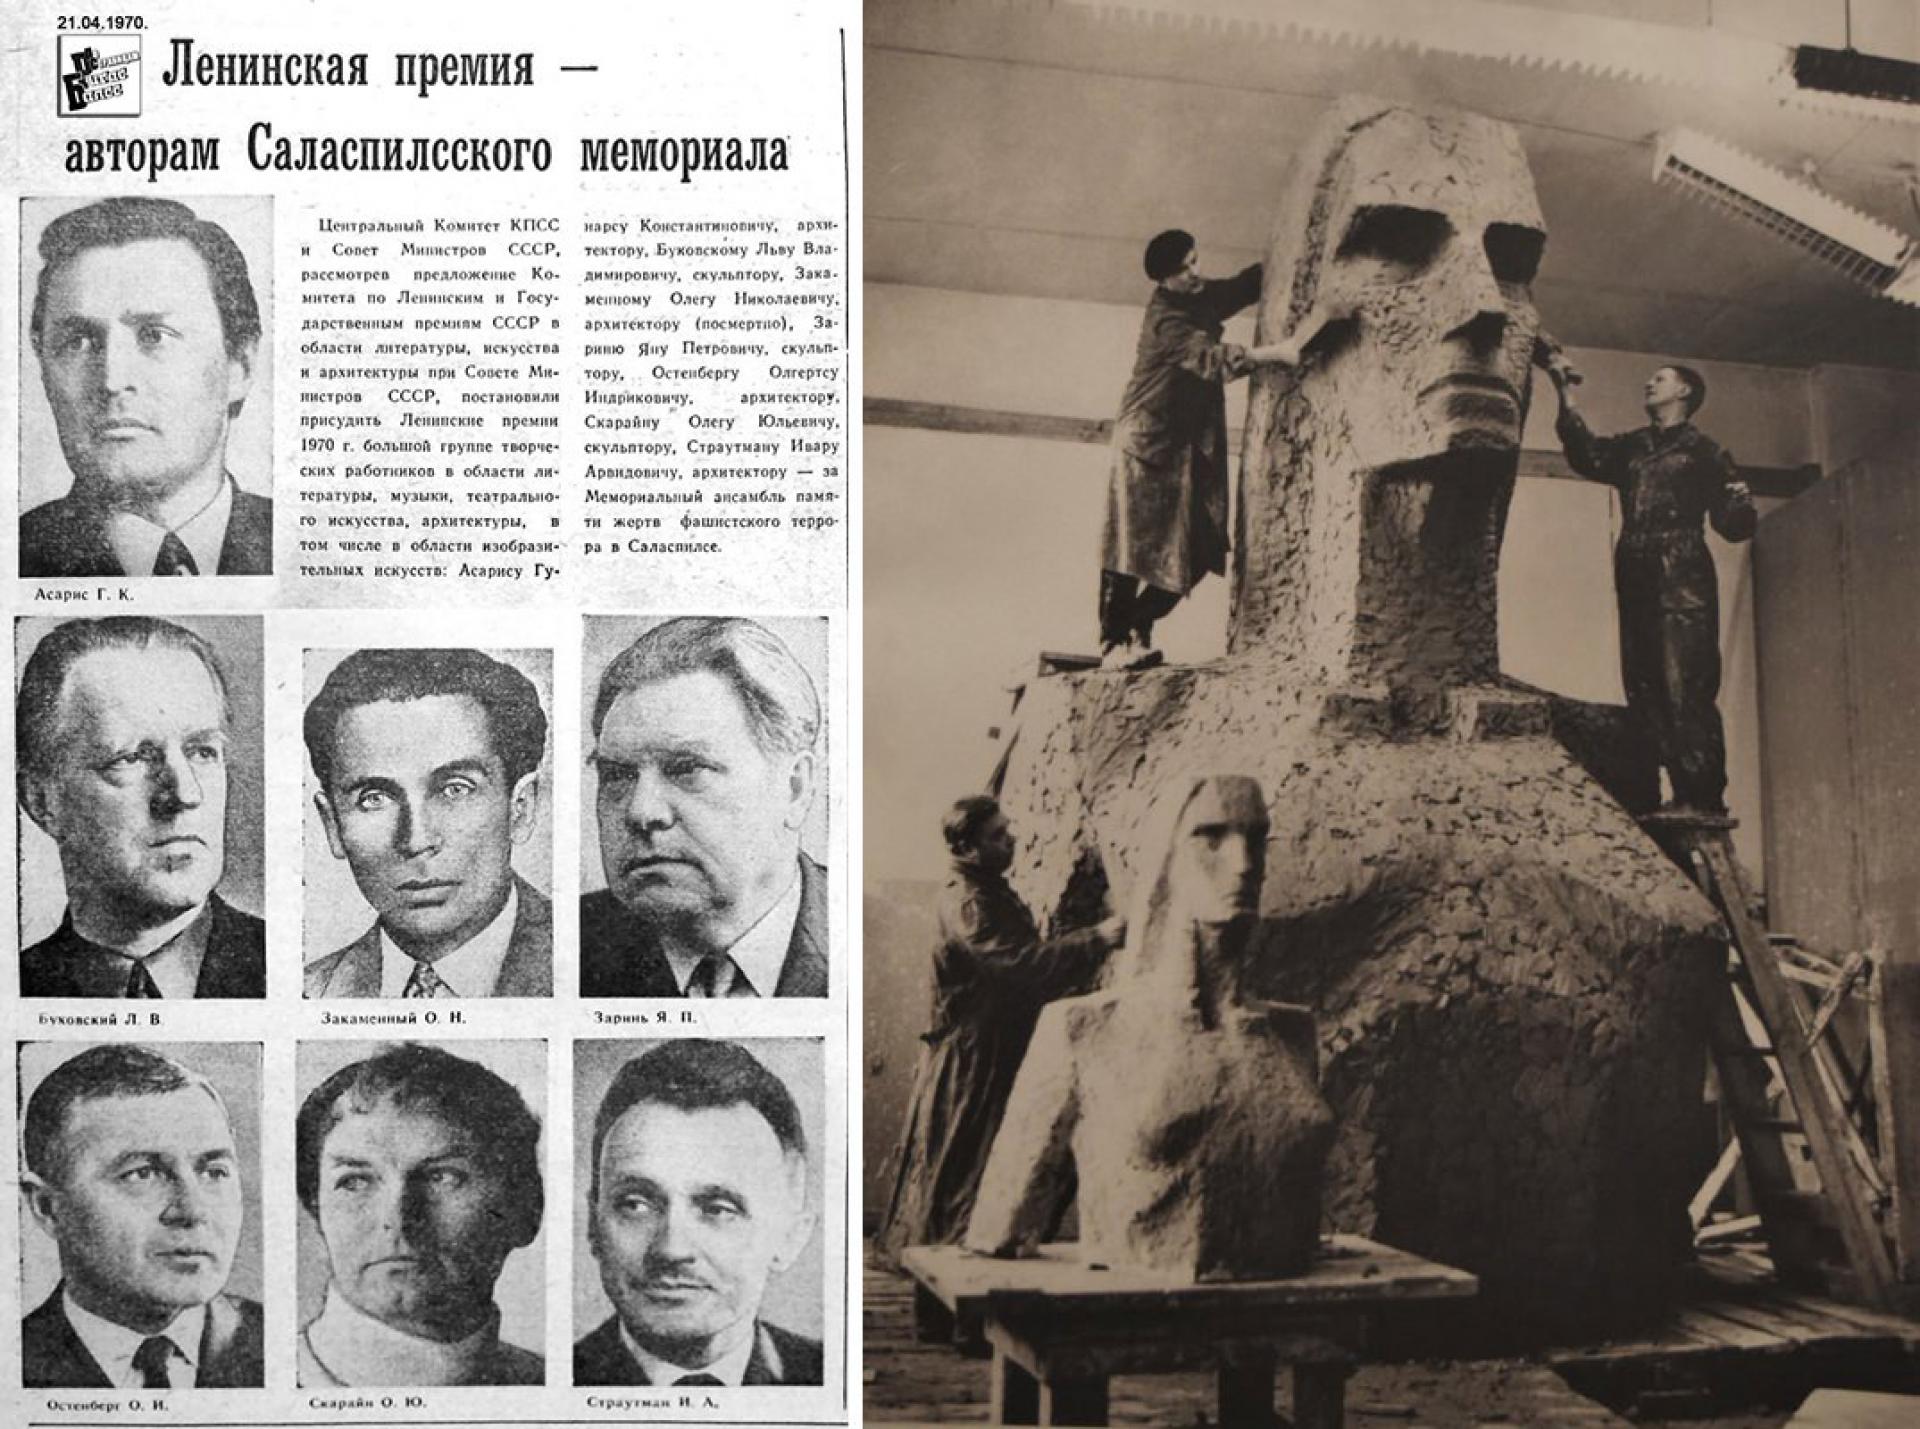 Left: a newspaper announces the Lenin Award given to the Salaspils design team. Right: ‘The Mother’ under construction.